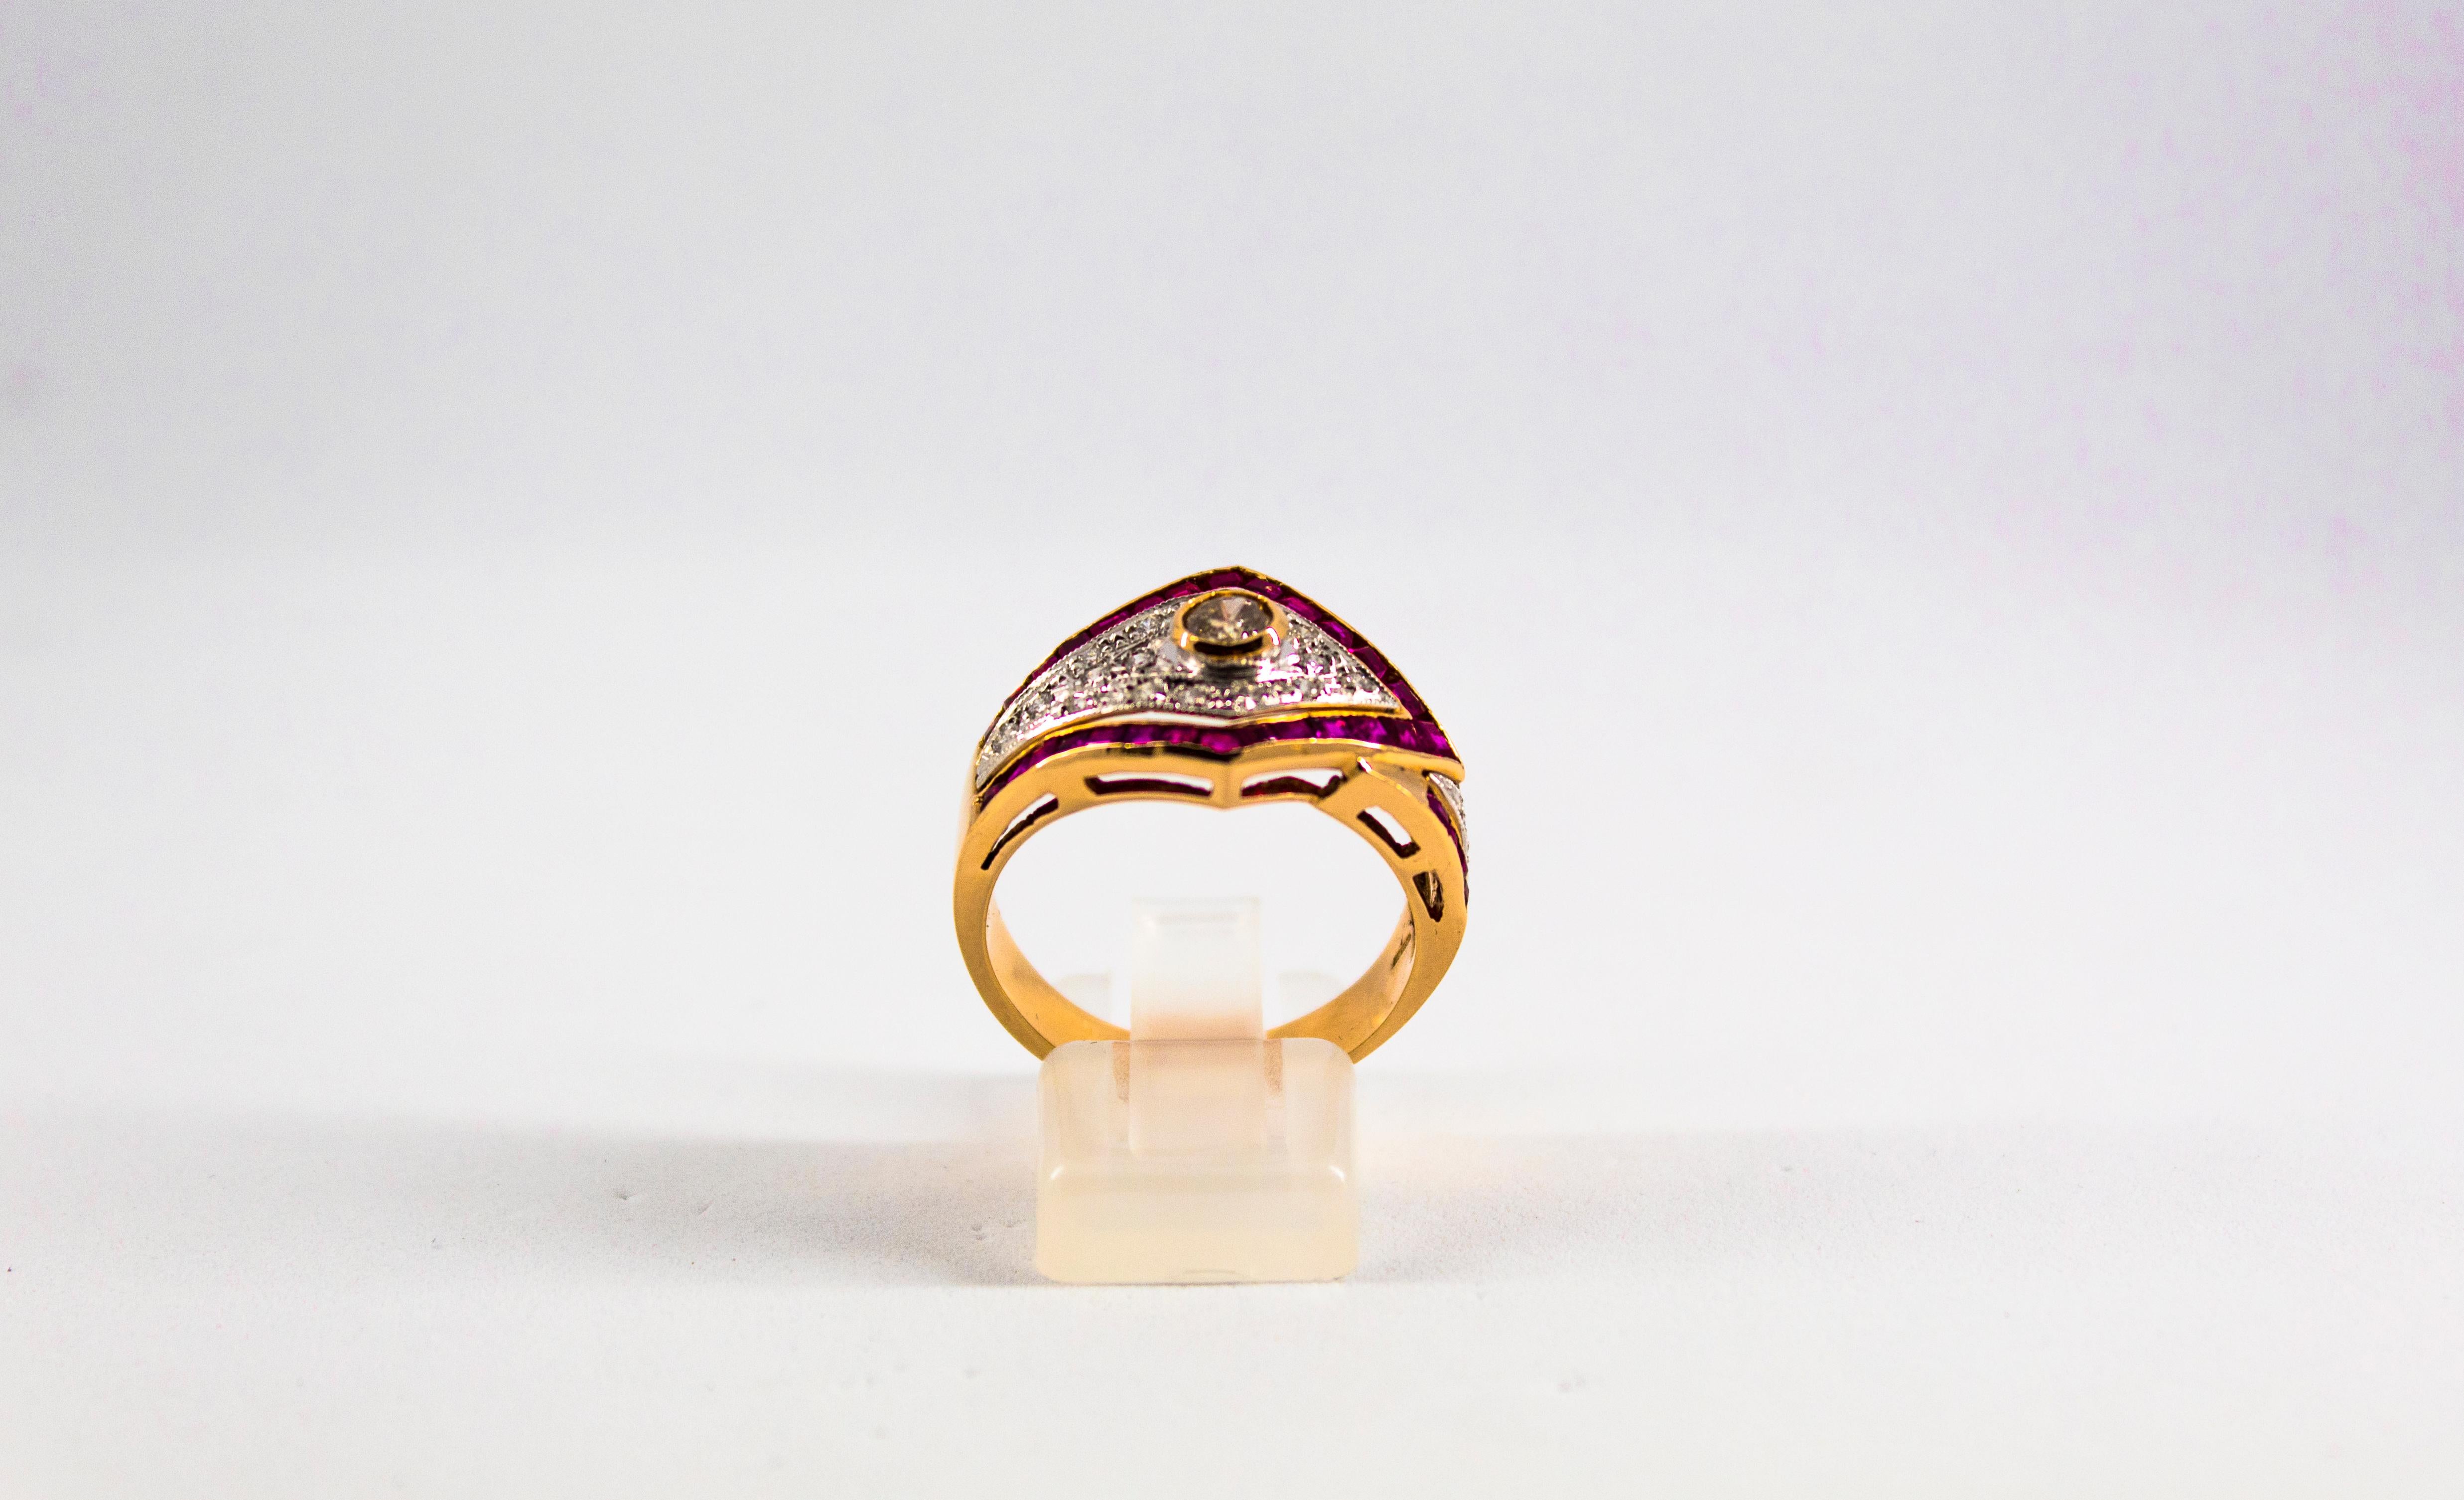 This Ring is made of 14K Yellow Gold.
This Ring has 0.60 Carats of White Brilliant Cut Diamonds.
This Ring has 1.53 Carats of Rubies.

Size ITA: 12 1/2 USA: 6 1/4

We're a workshop so every piece is handmade, customizable and resizable.